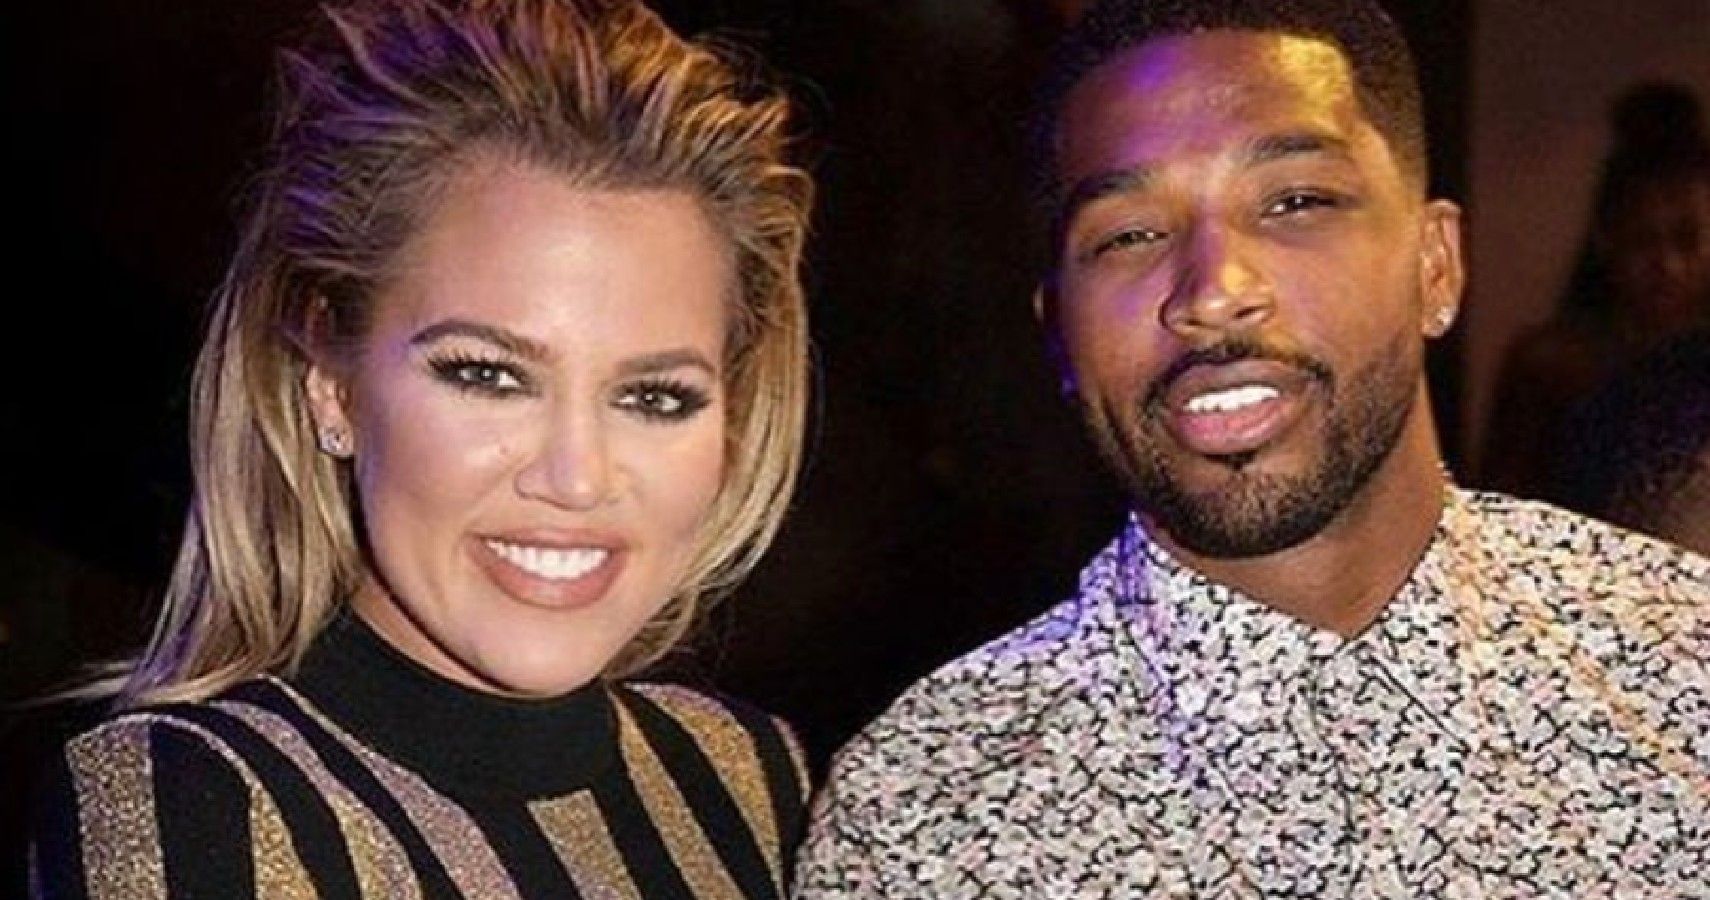 Khloe Kardashian Reveals Her & Tristan’s Baby Plans For The Future